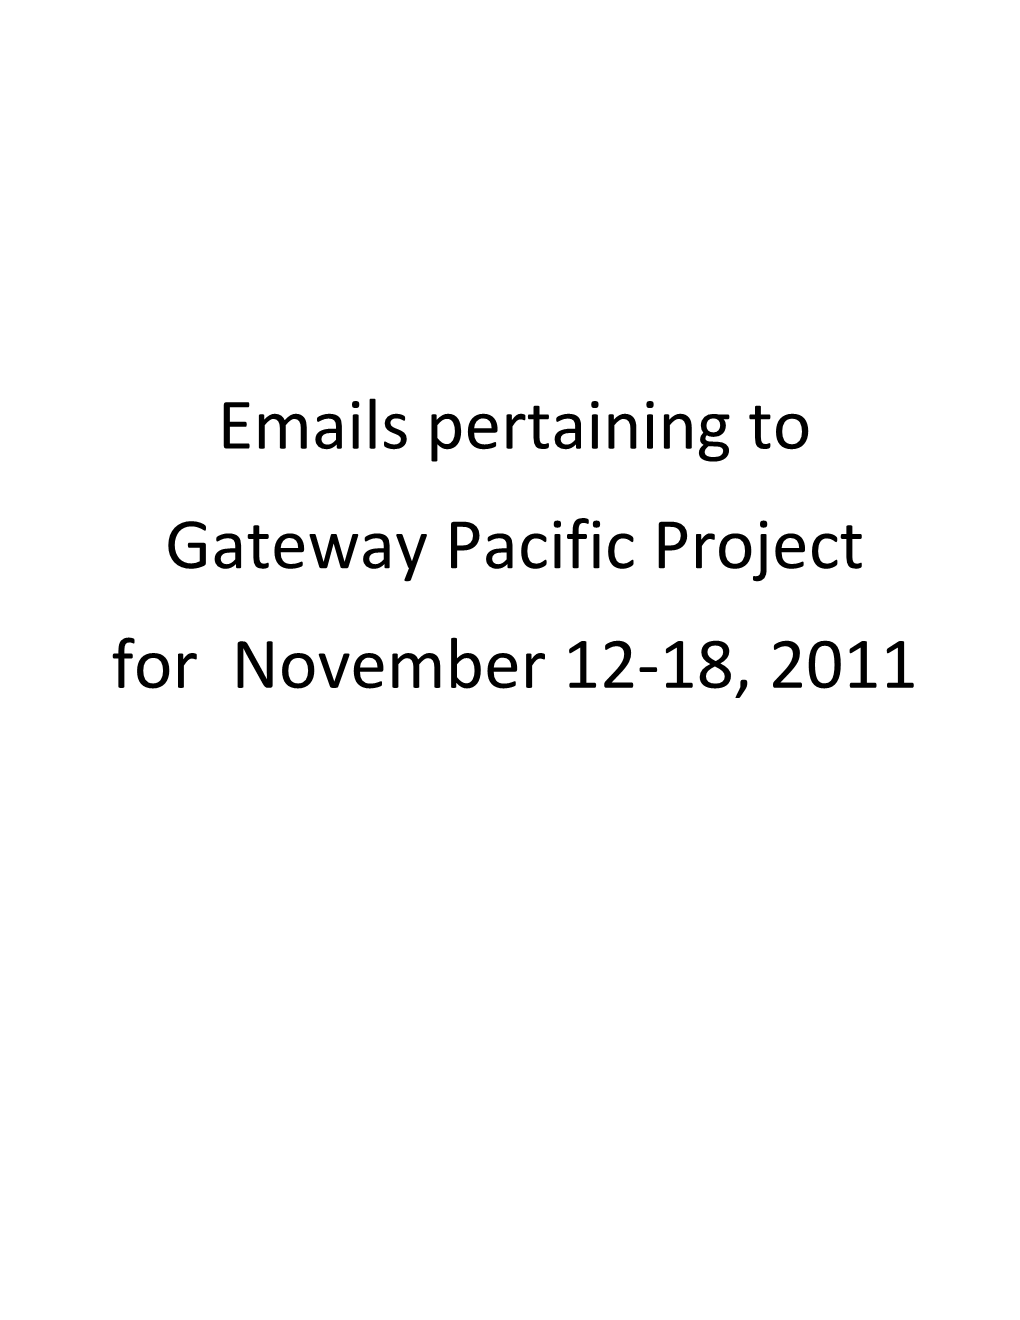 Emails Pertaining to Gateway Pacific Project for November 12-18, 2011